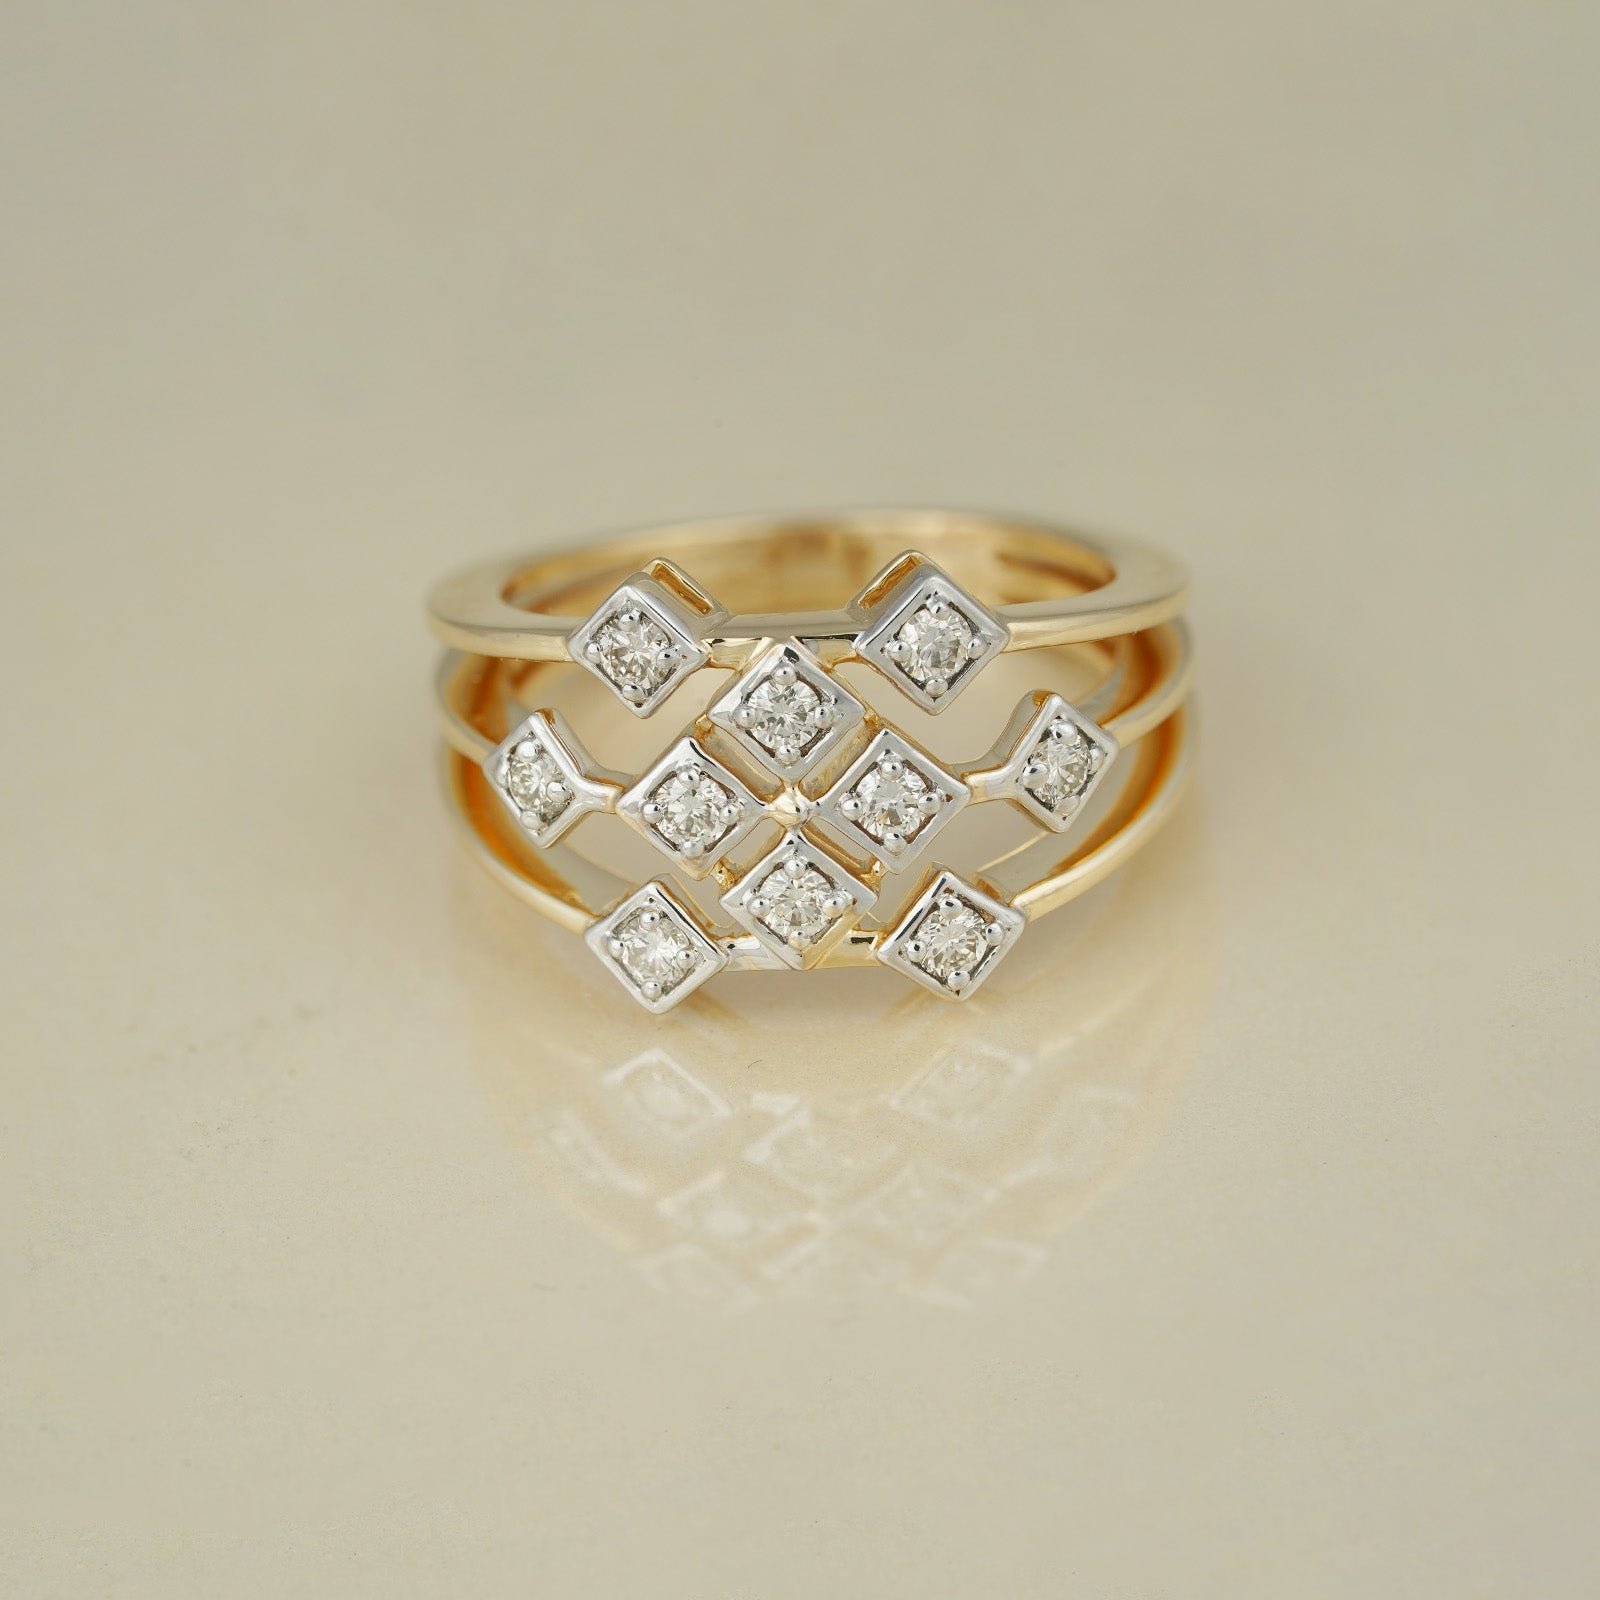  Gold and Diamond Ring